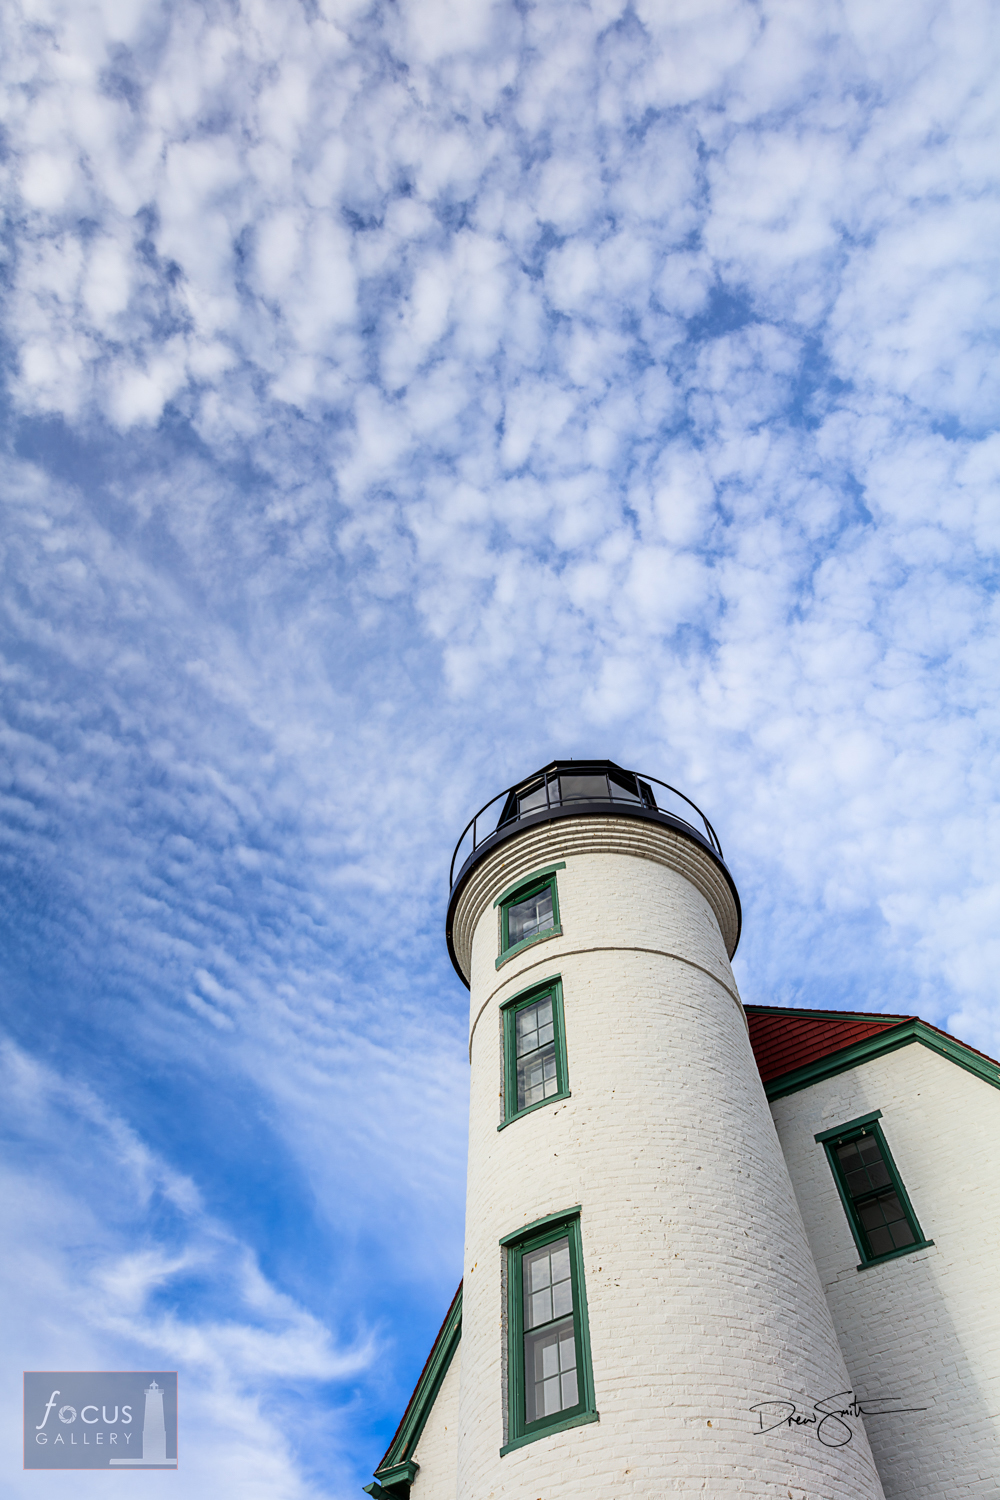 The   tower of the Point Betsie lighthouse climbs into a blue sky dotted with   clouds.